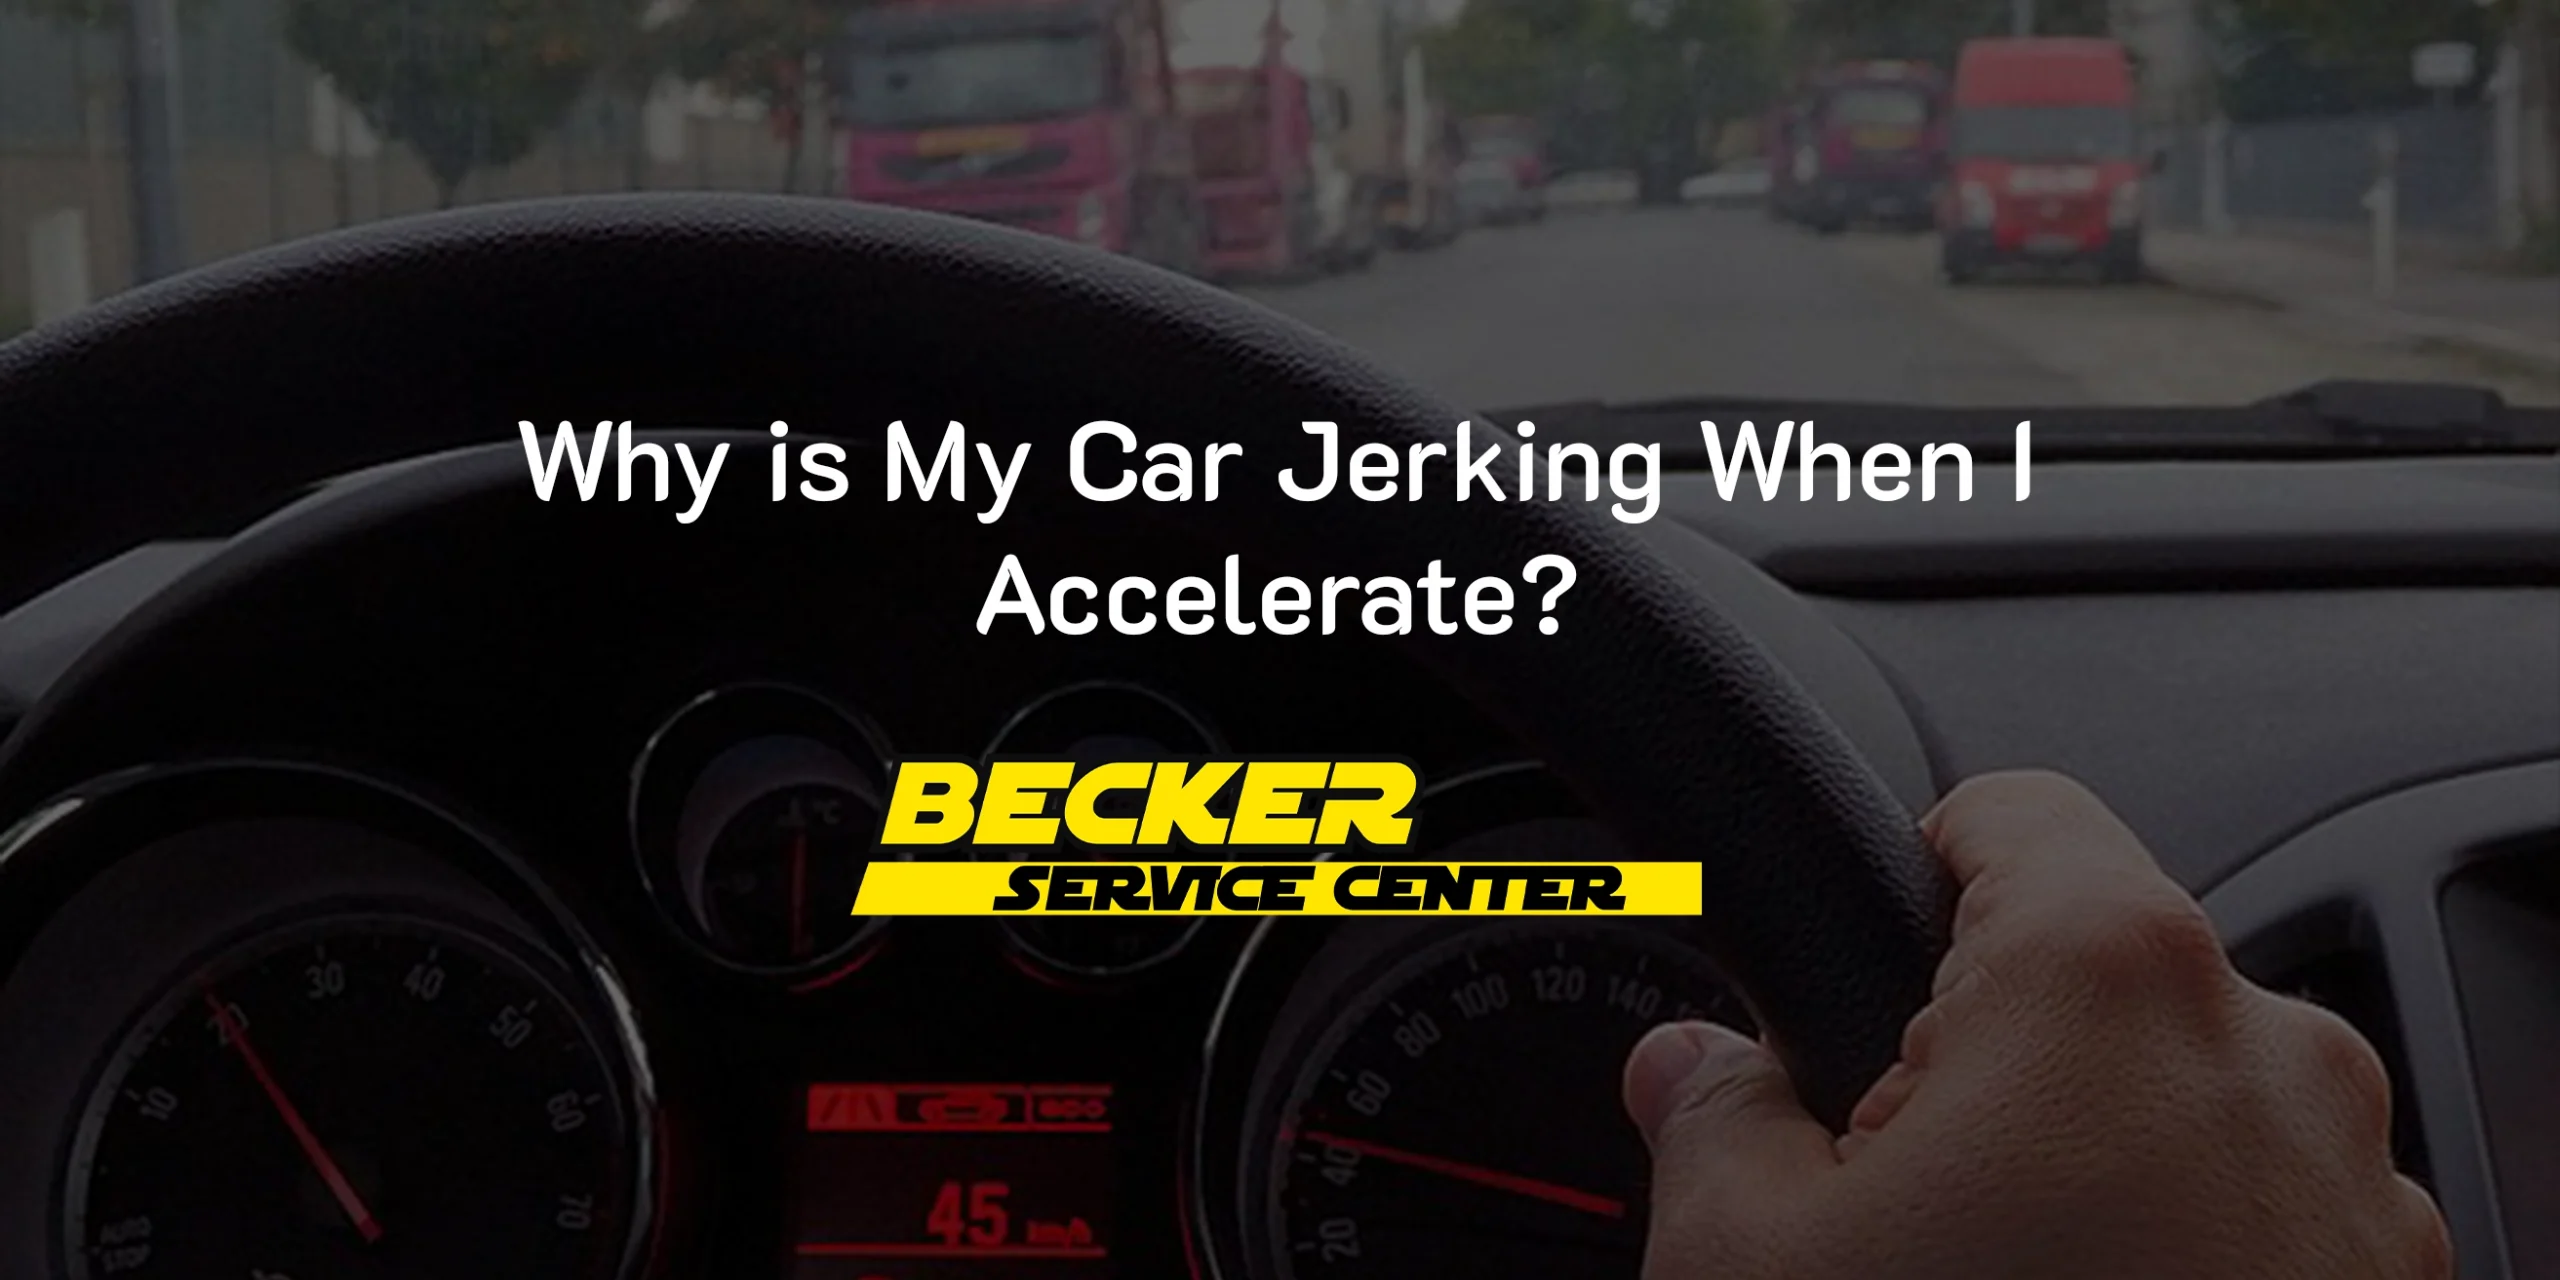 Why is My Car Jerking When I Accelerate?